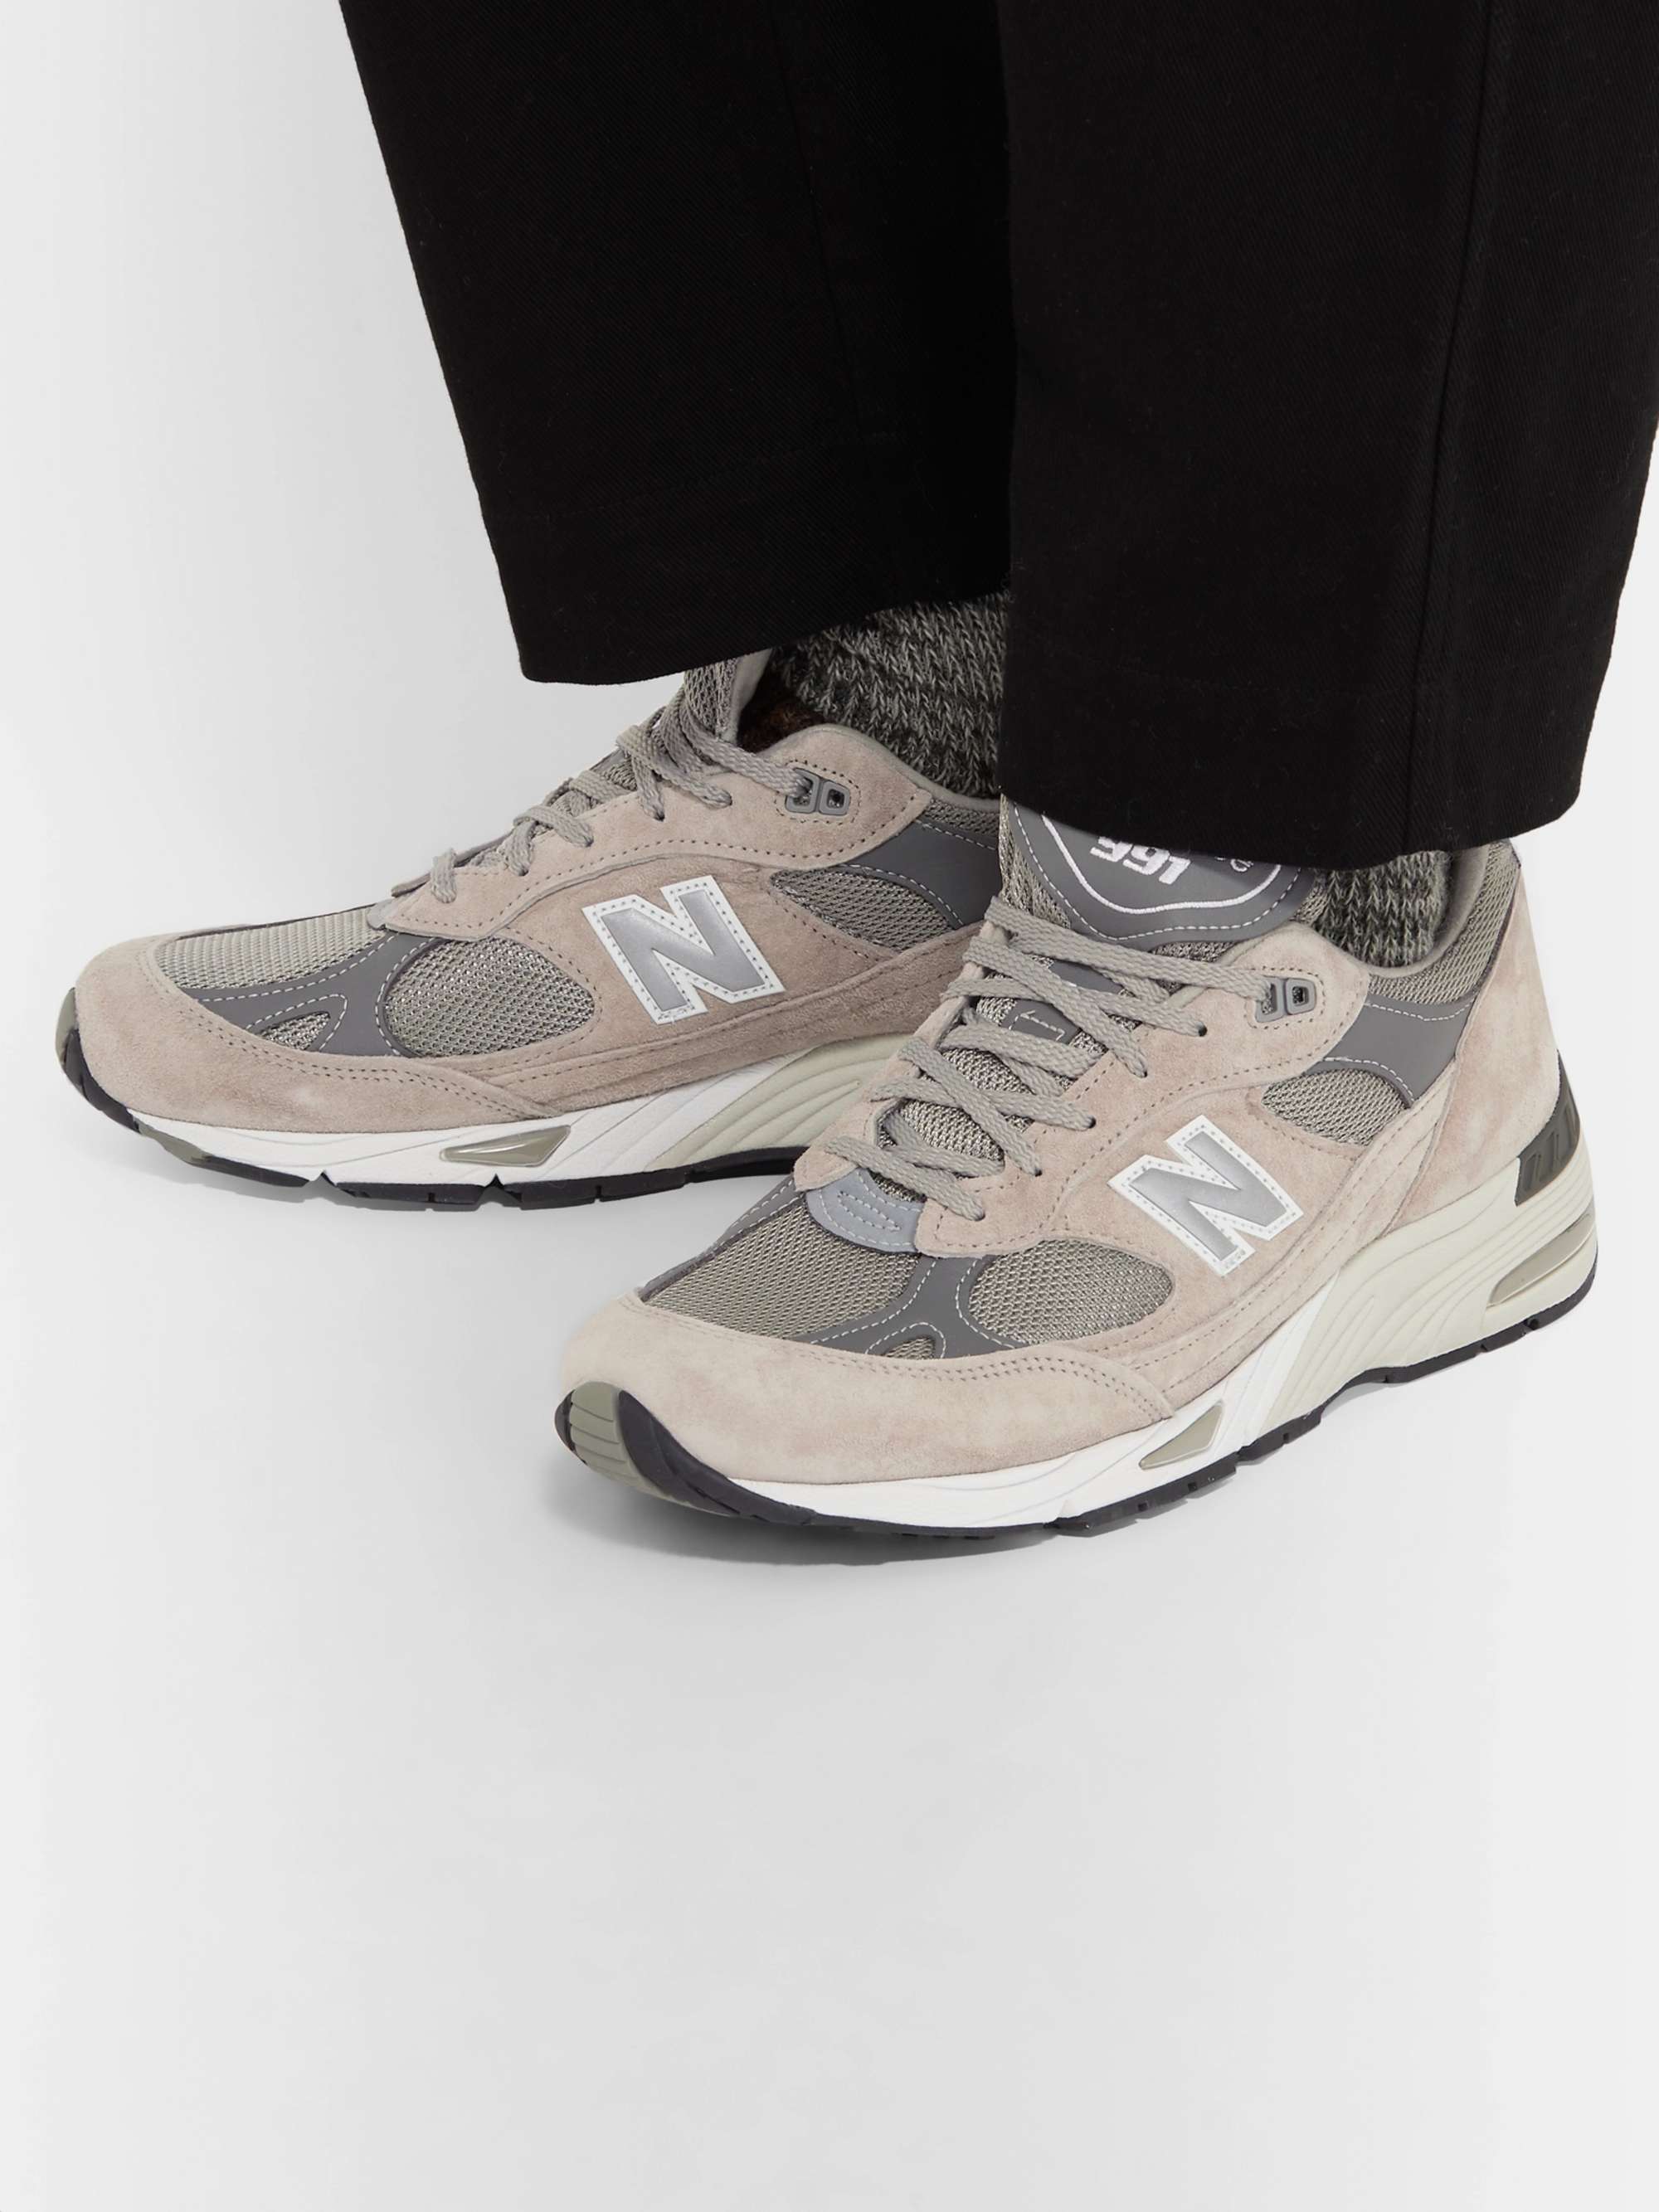 NEW BALANCE 991 Suede, Mesh and Leather Sneakers